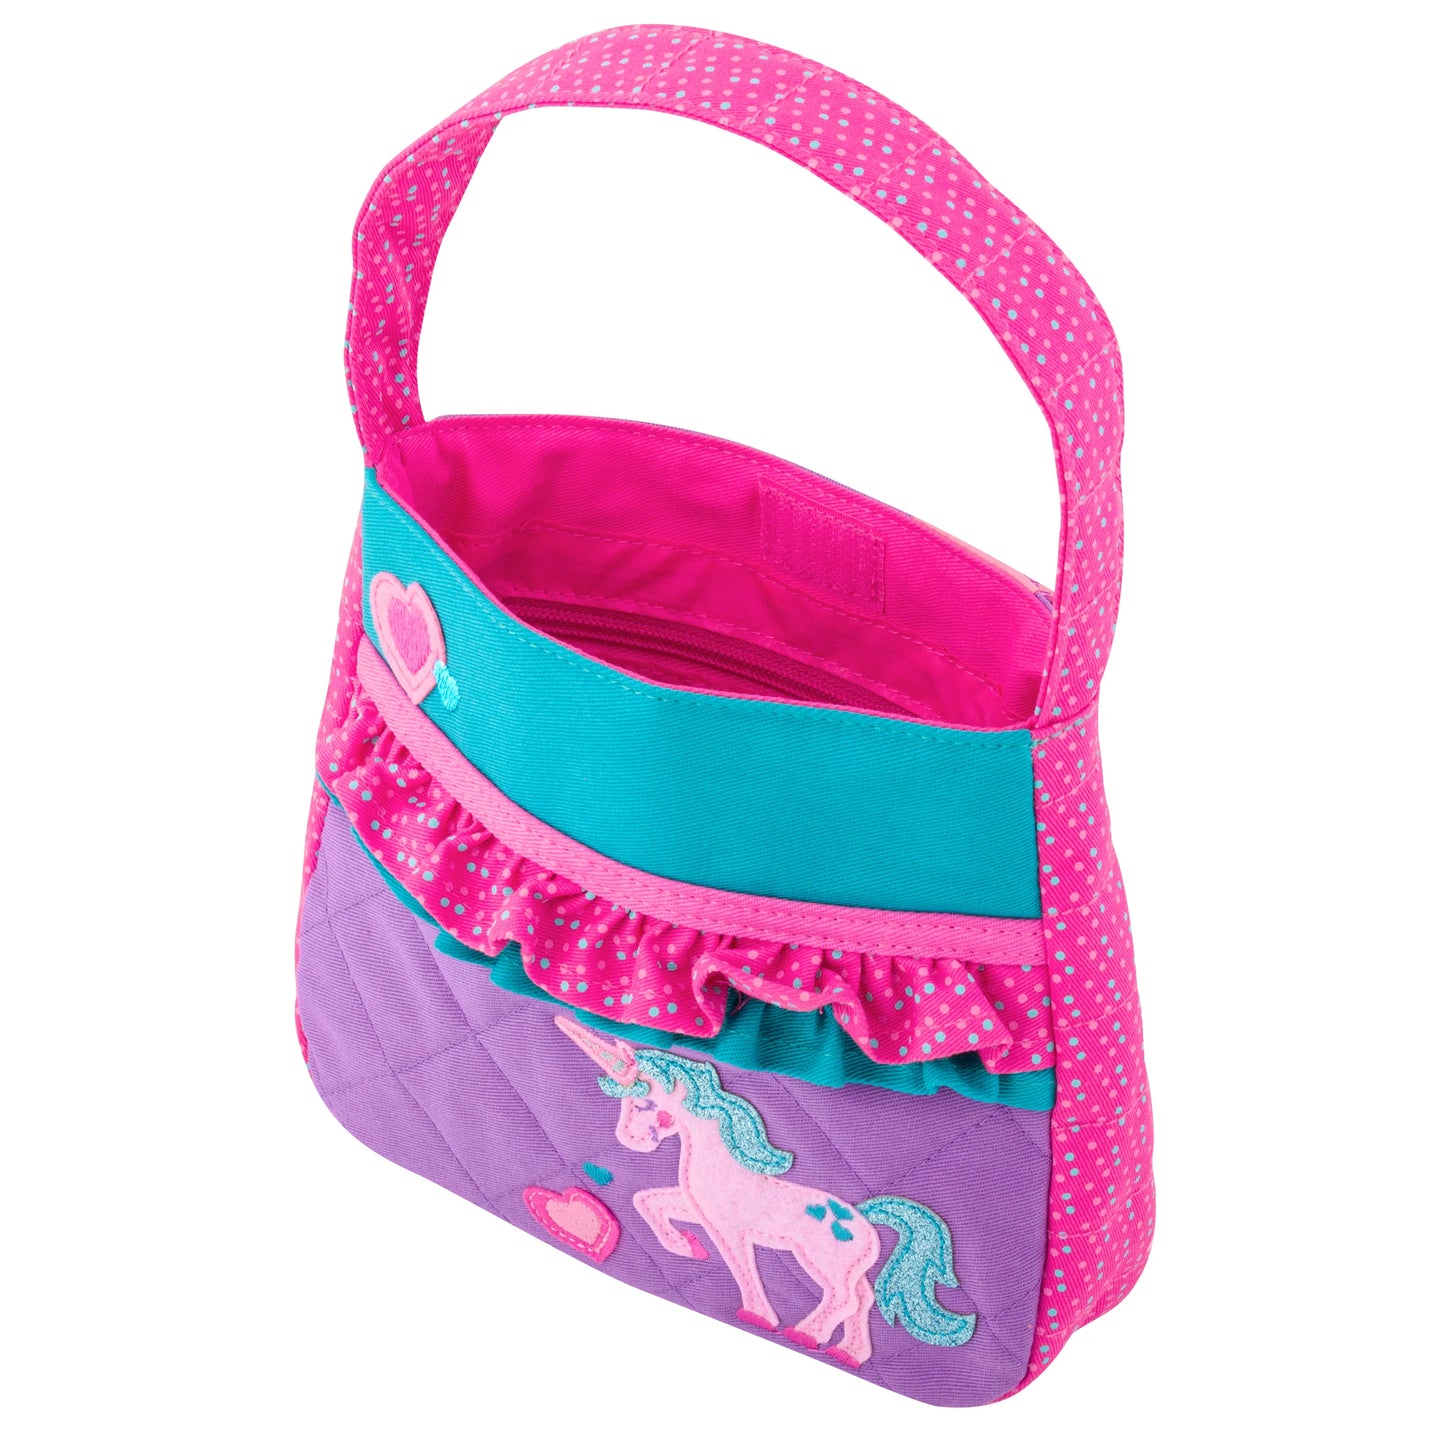 Quilted Unicorn Toddler Purse